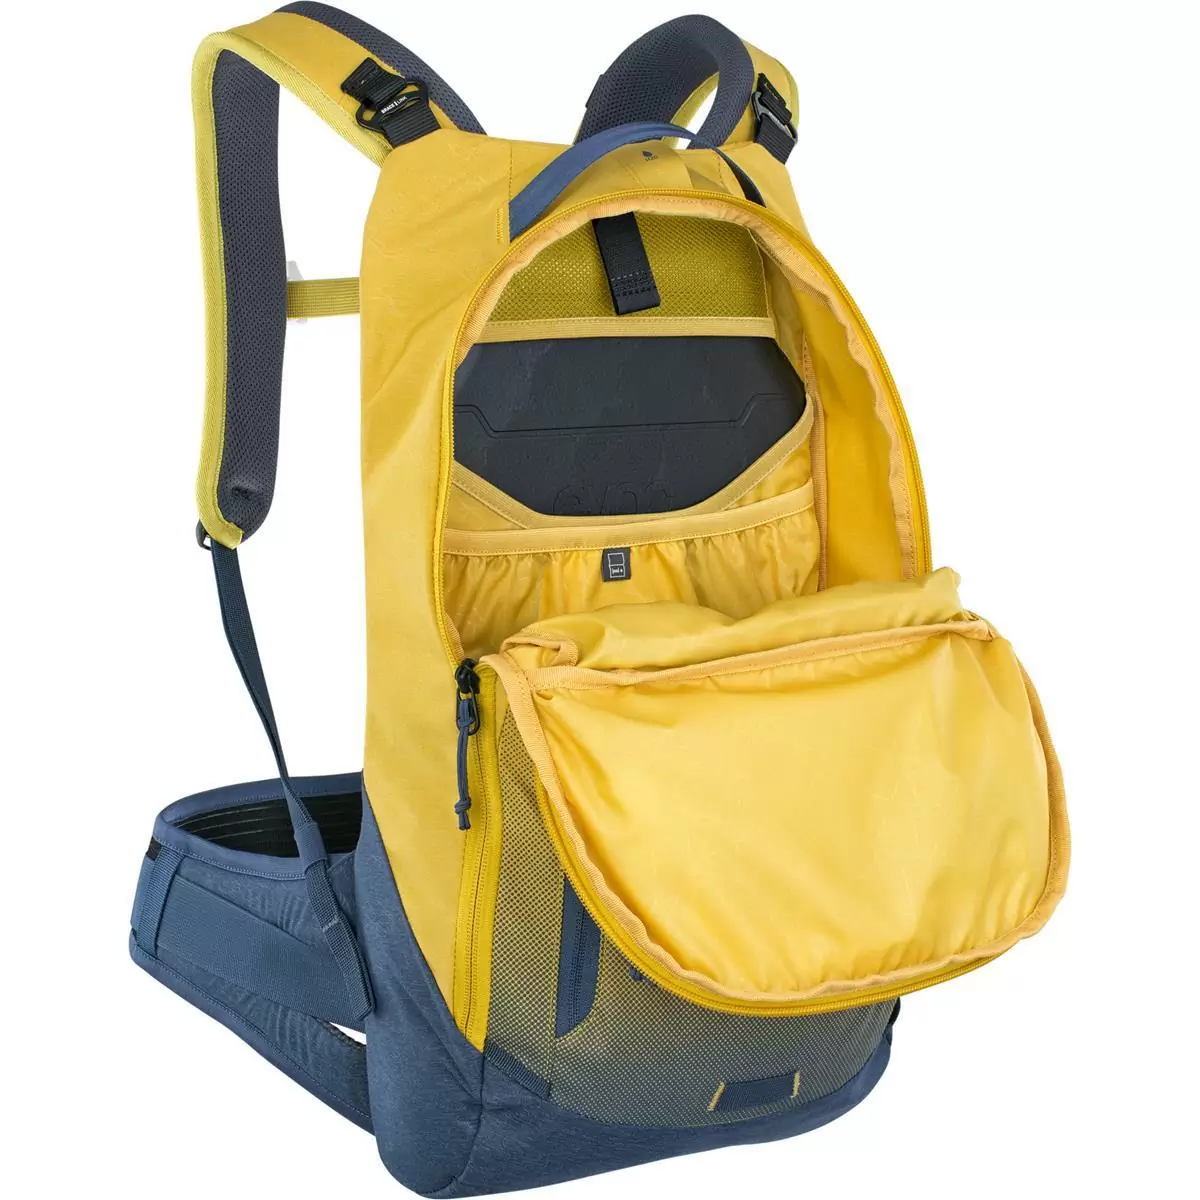 Trail Pro backpack 10 liters Curry – Denim with back protector size S/M #2